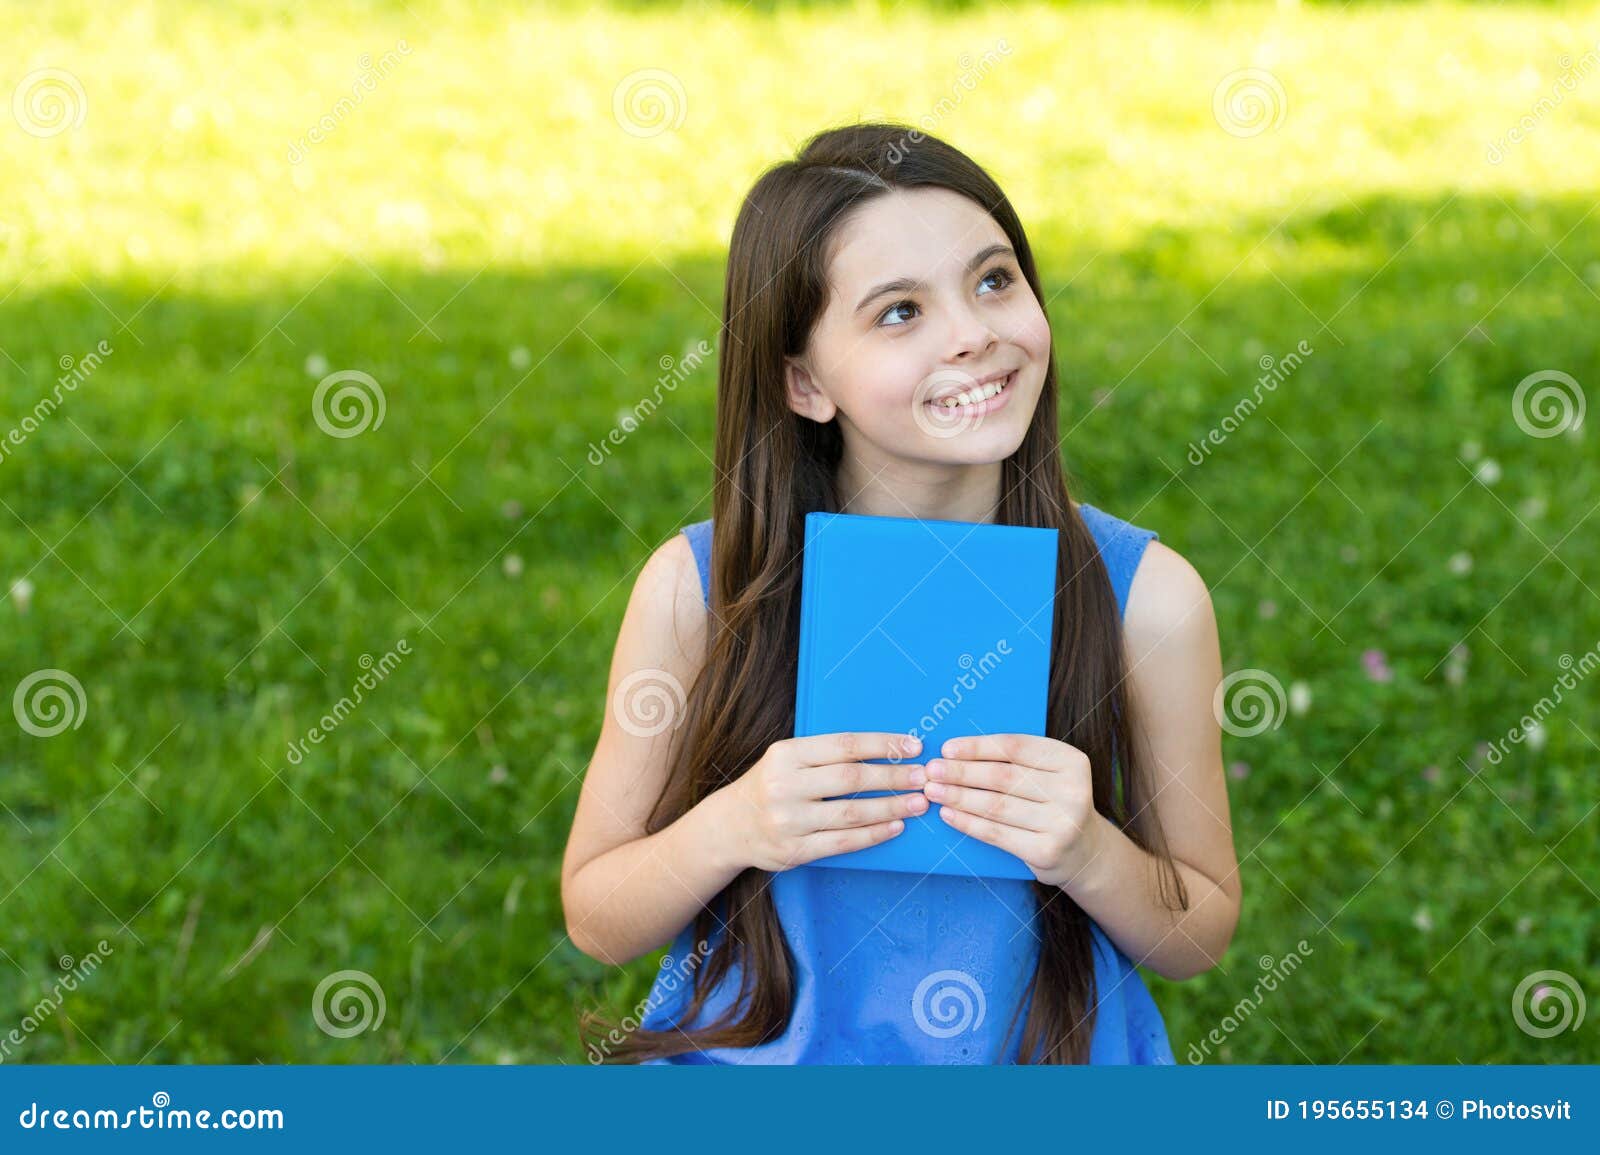 little happy girl reading book outdoors sunny day, daydreamer concept